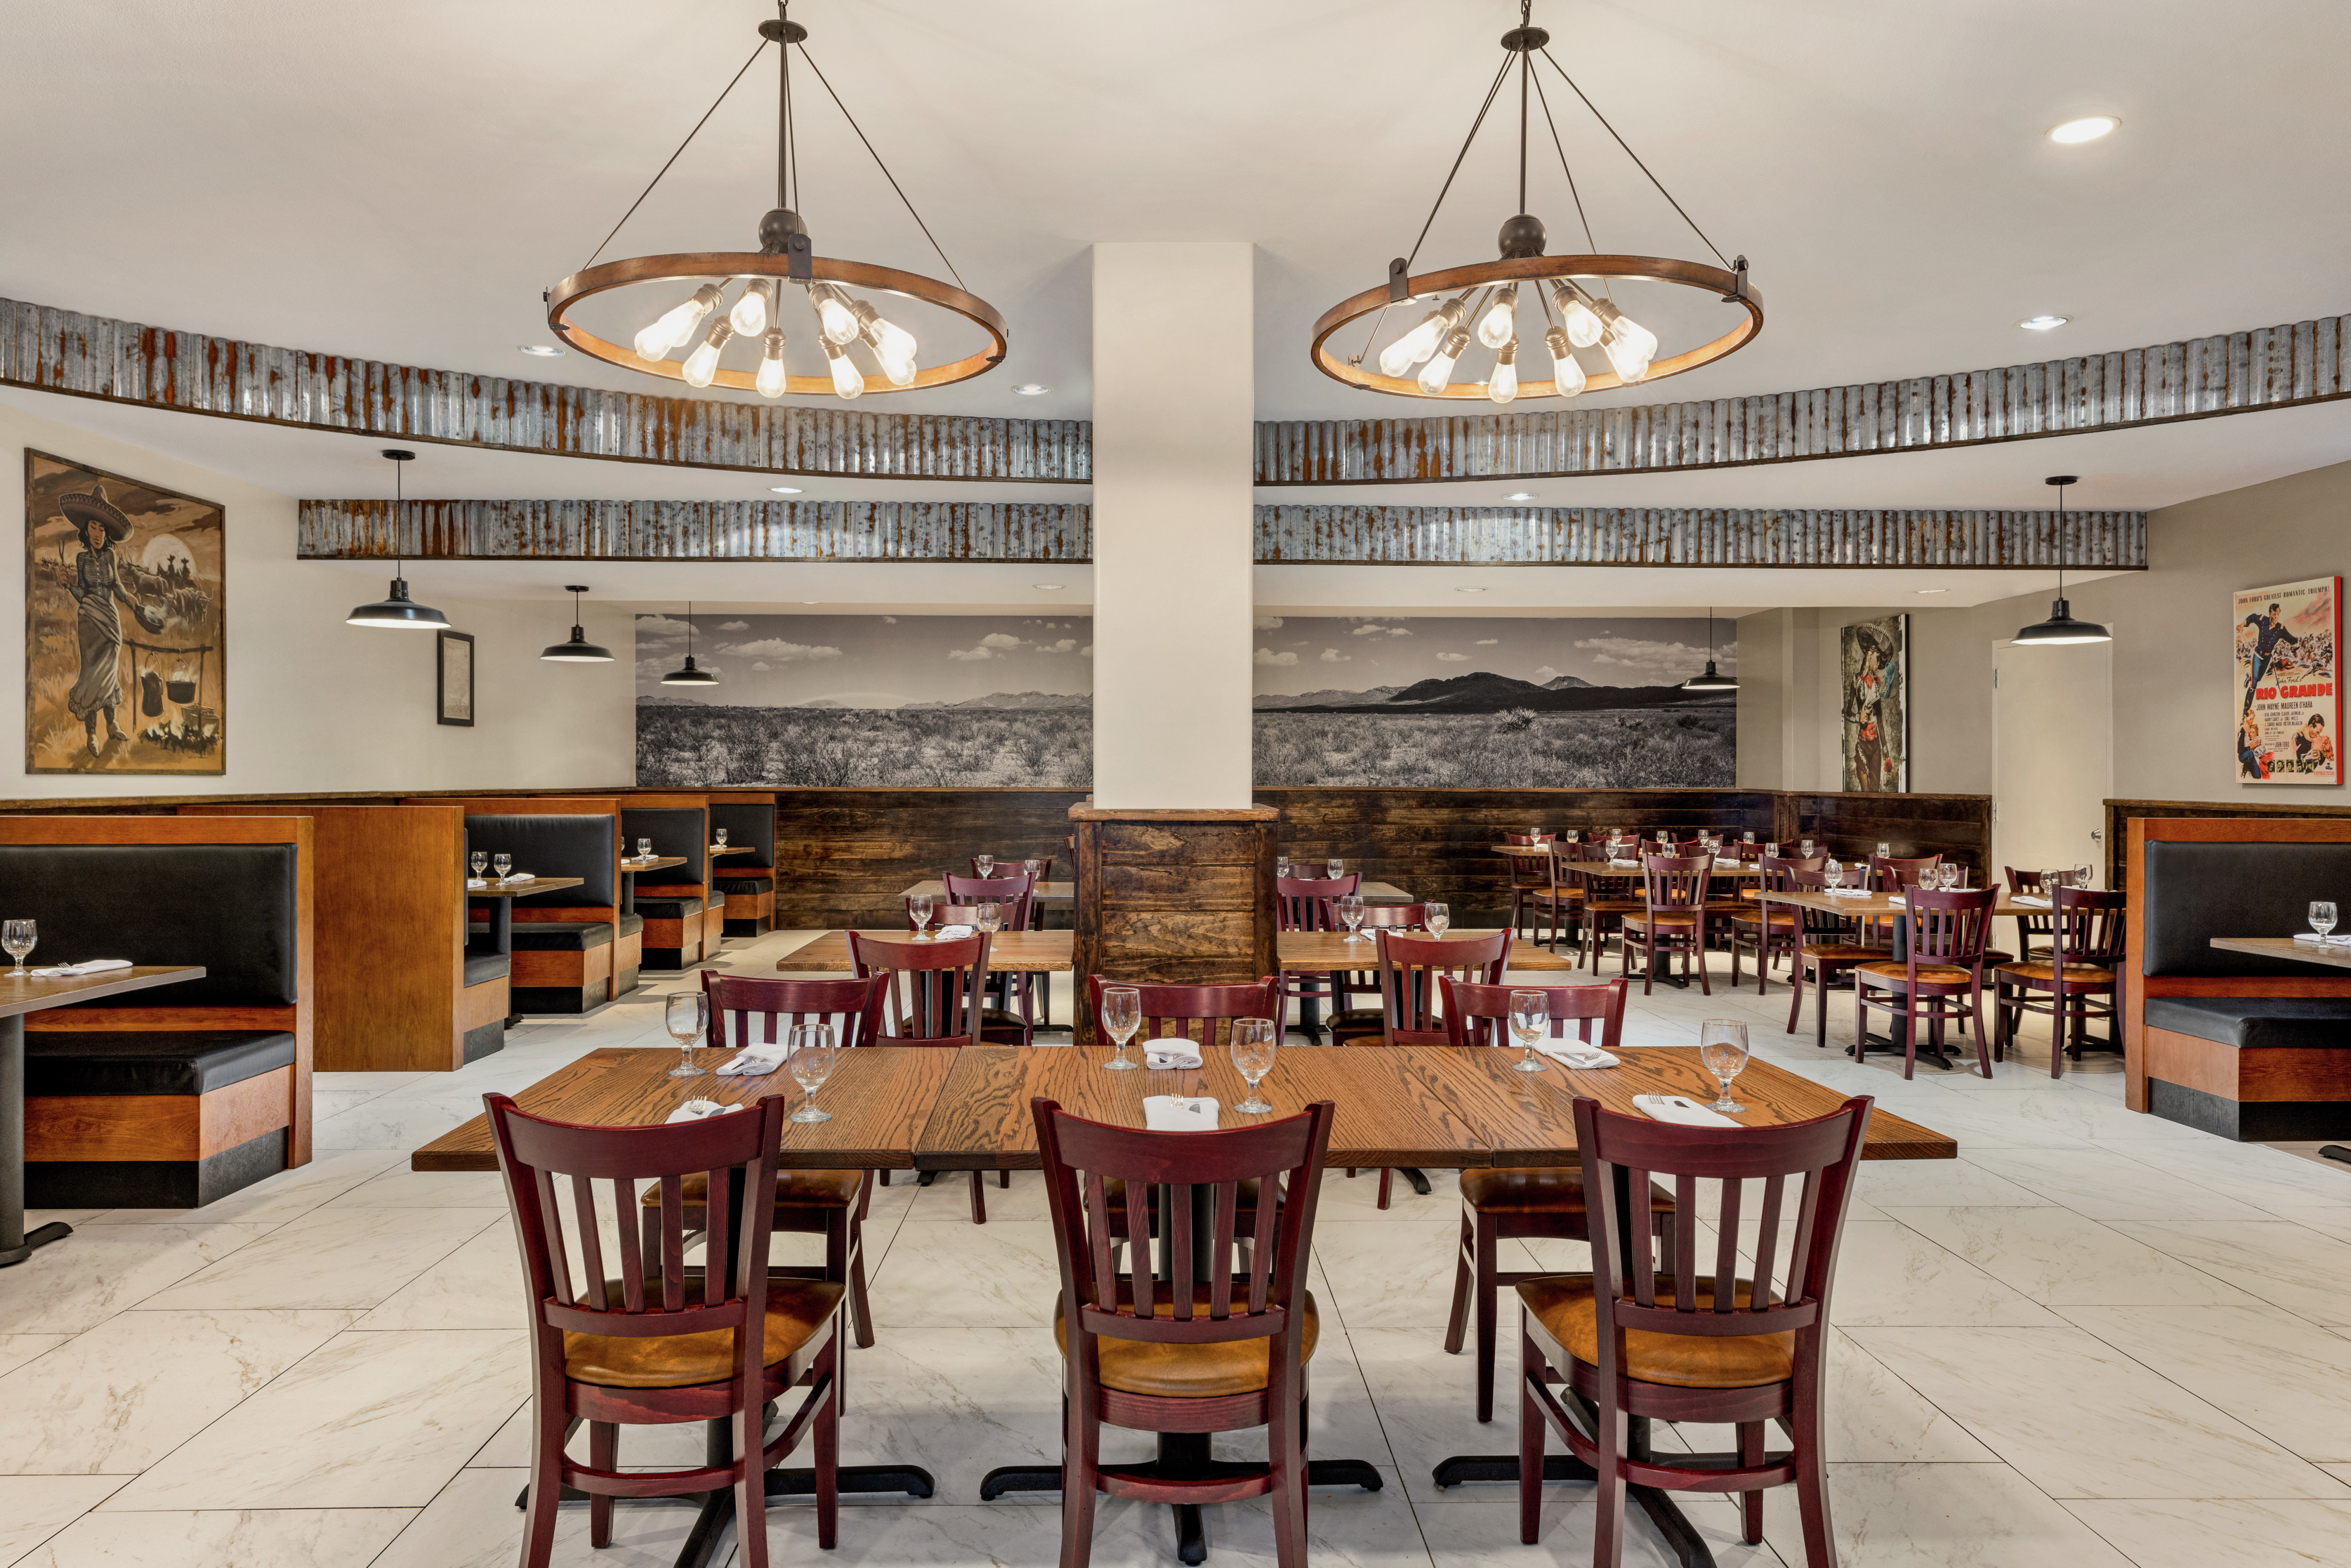 On-site restaurant with ample seating, beautiful design, and delicious food